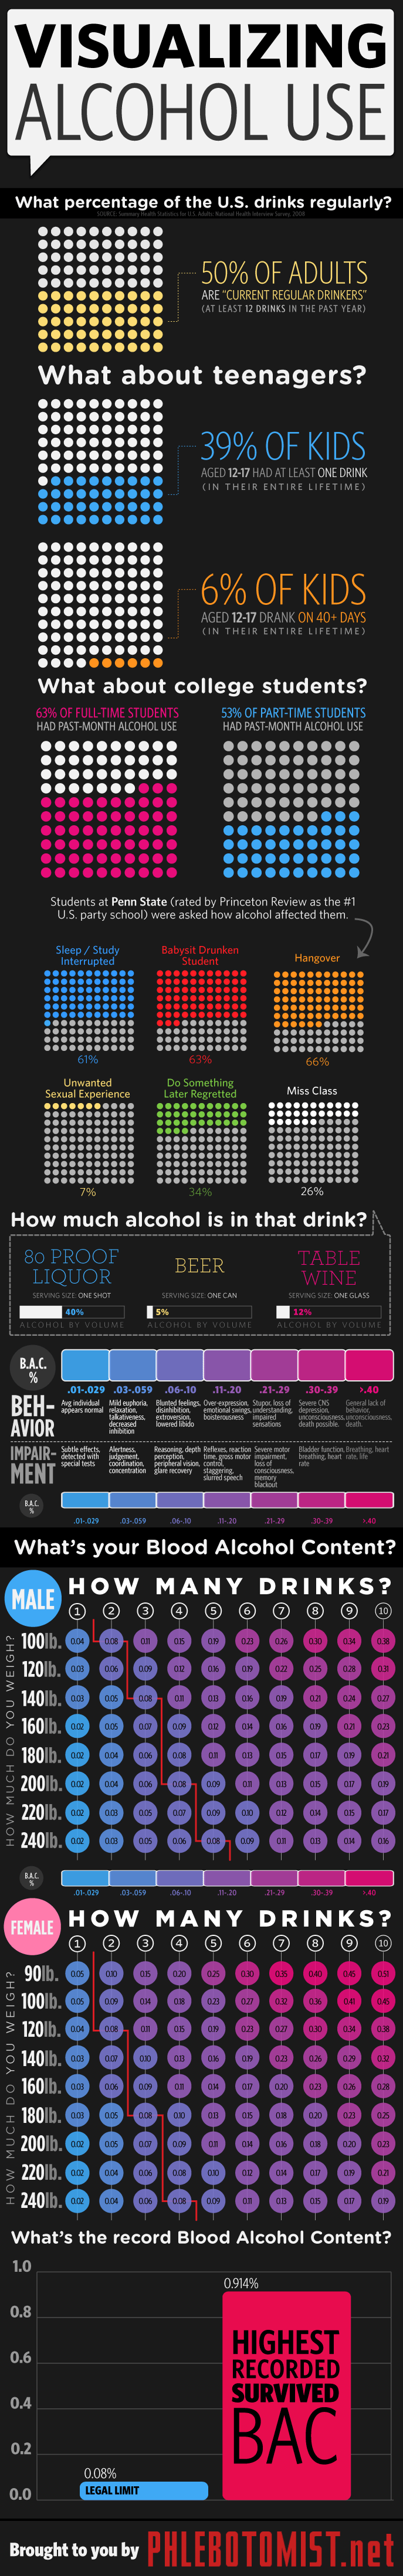 blood_alcohol_infographic.f1